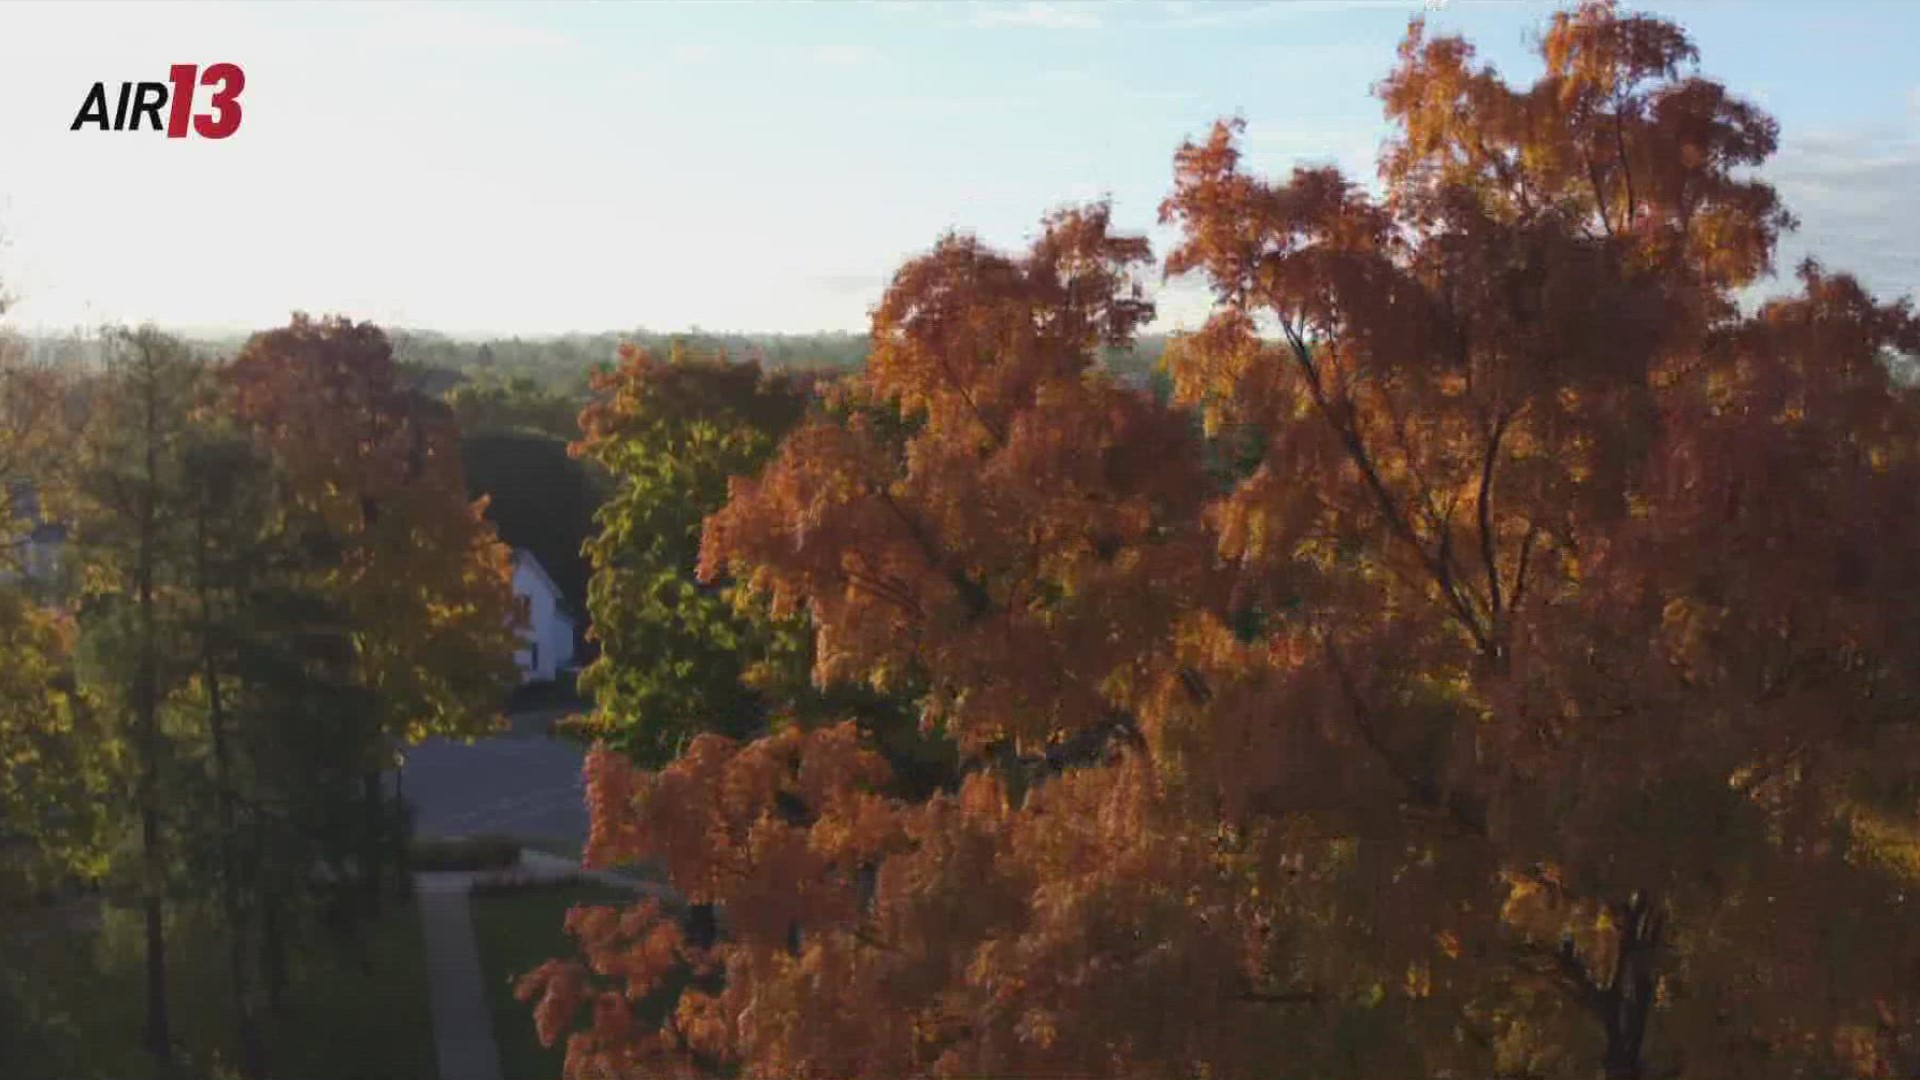 Our unusually warm October weather is impacting our fall colors this year, or better yet our lack there of. Meteorologist Michael Behrens explains what is going on.